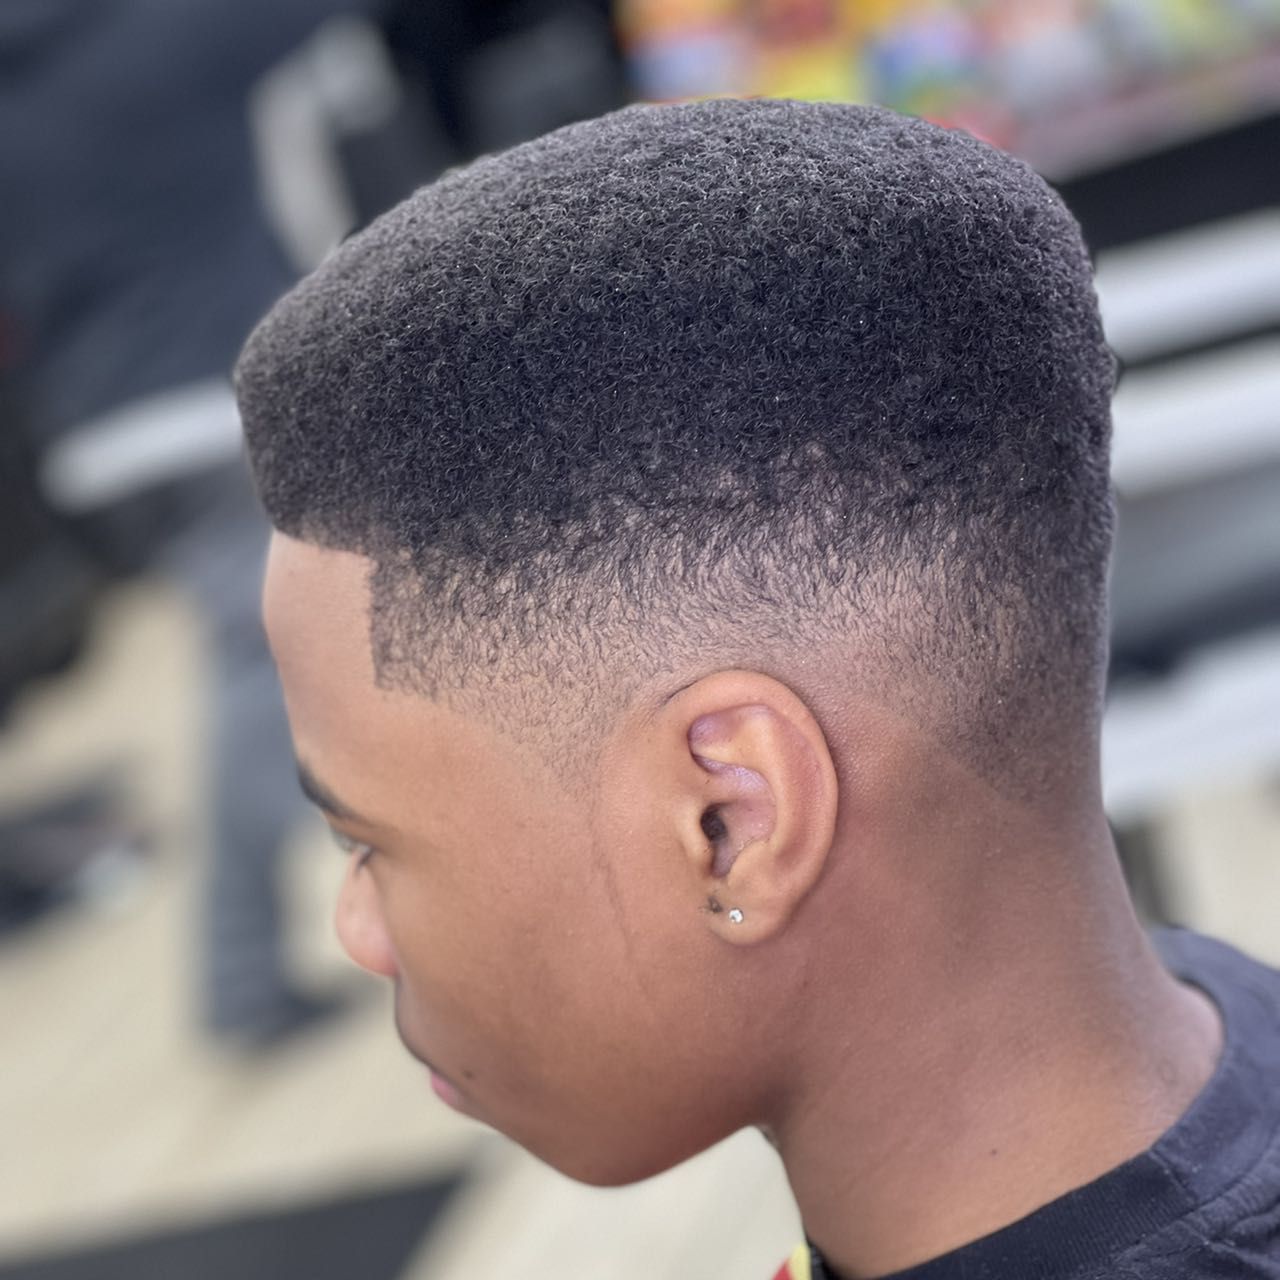 Young mens haircut (2 - 17) years old portfolio